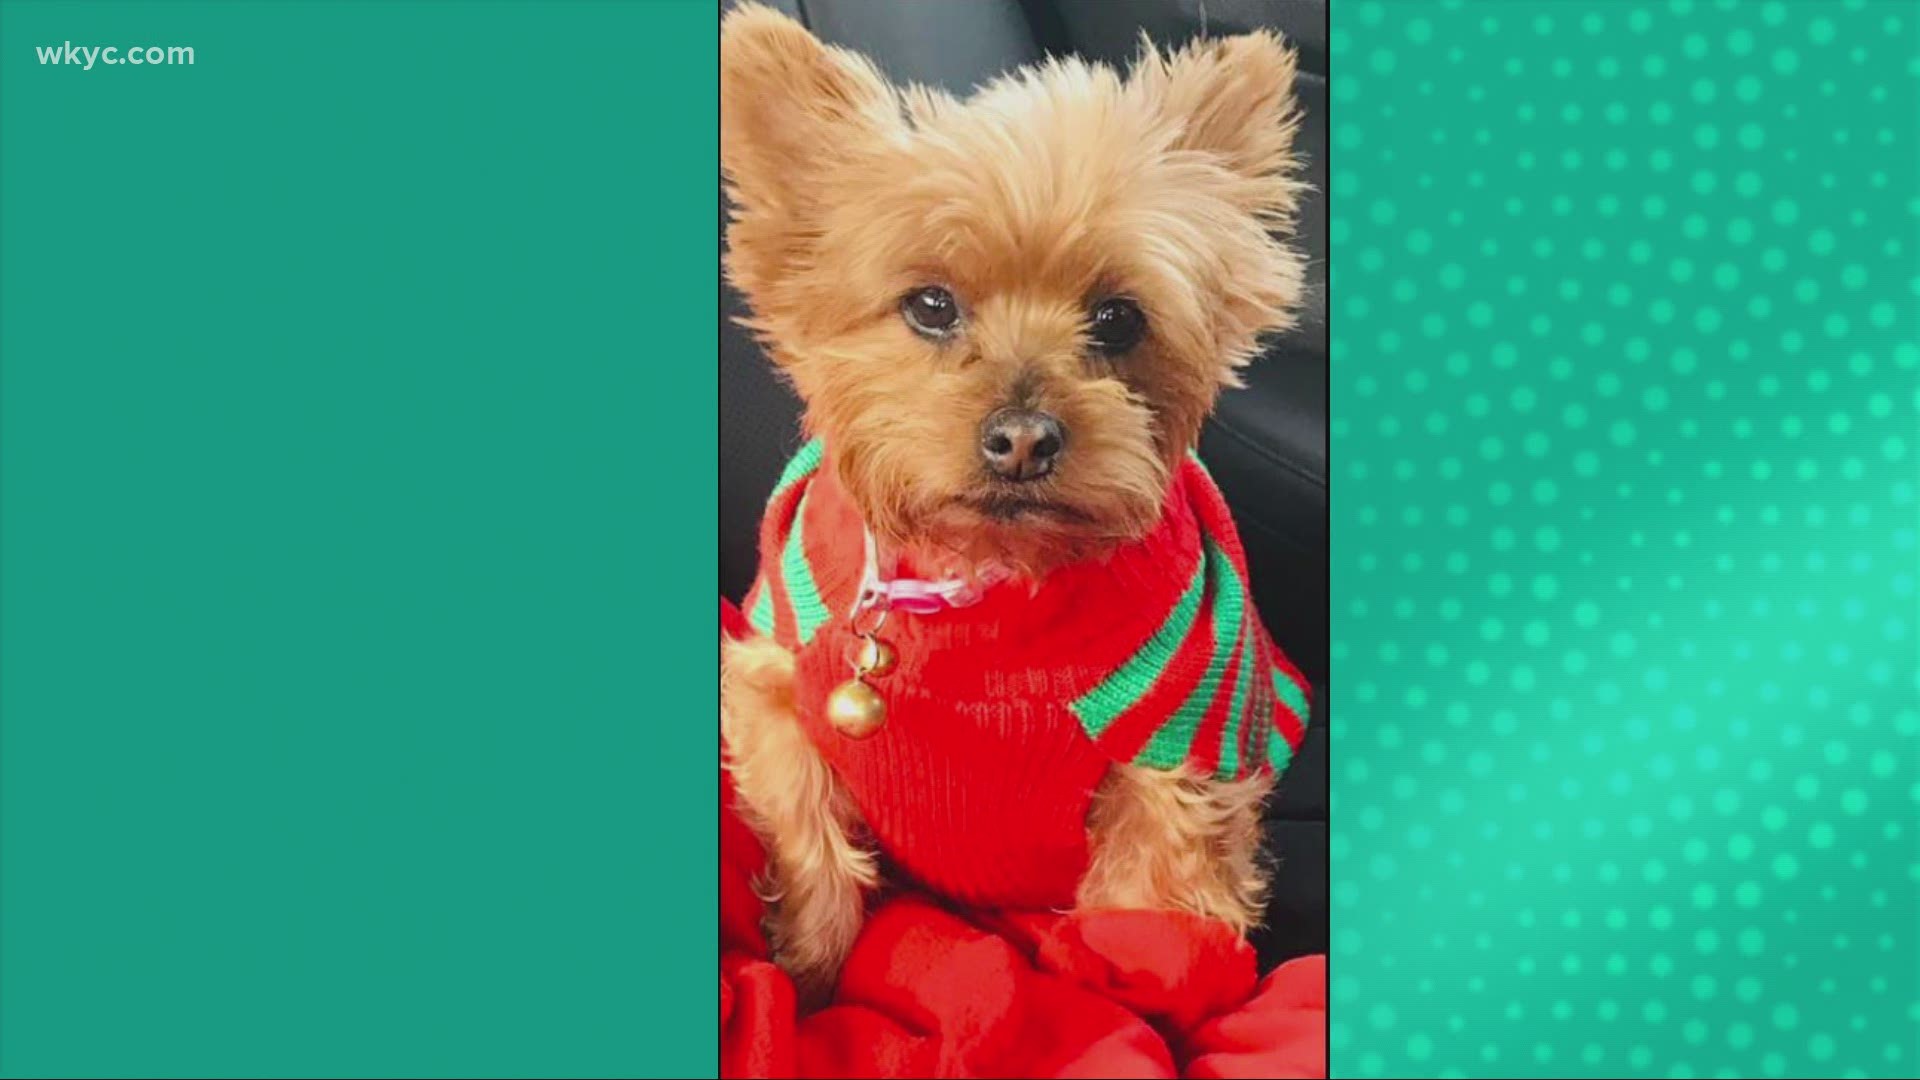 Jan. 14, 2021: It's Dress Up Your Pet Day, and we're celebrating by sharing some viewer photos.